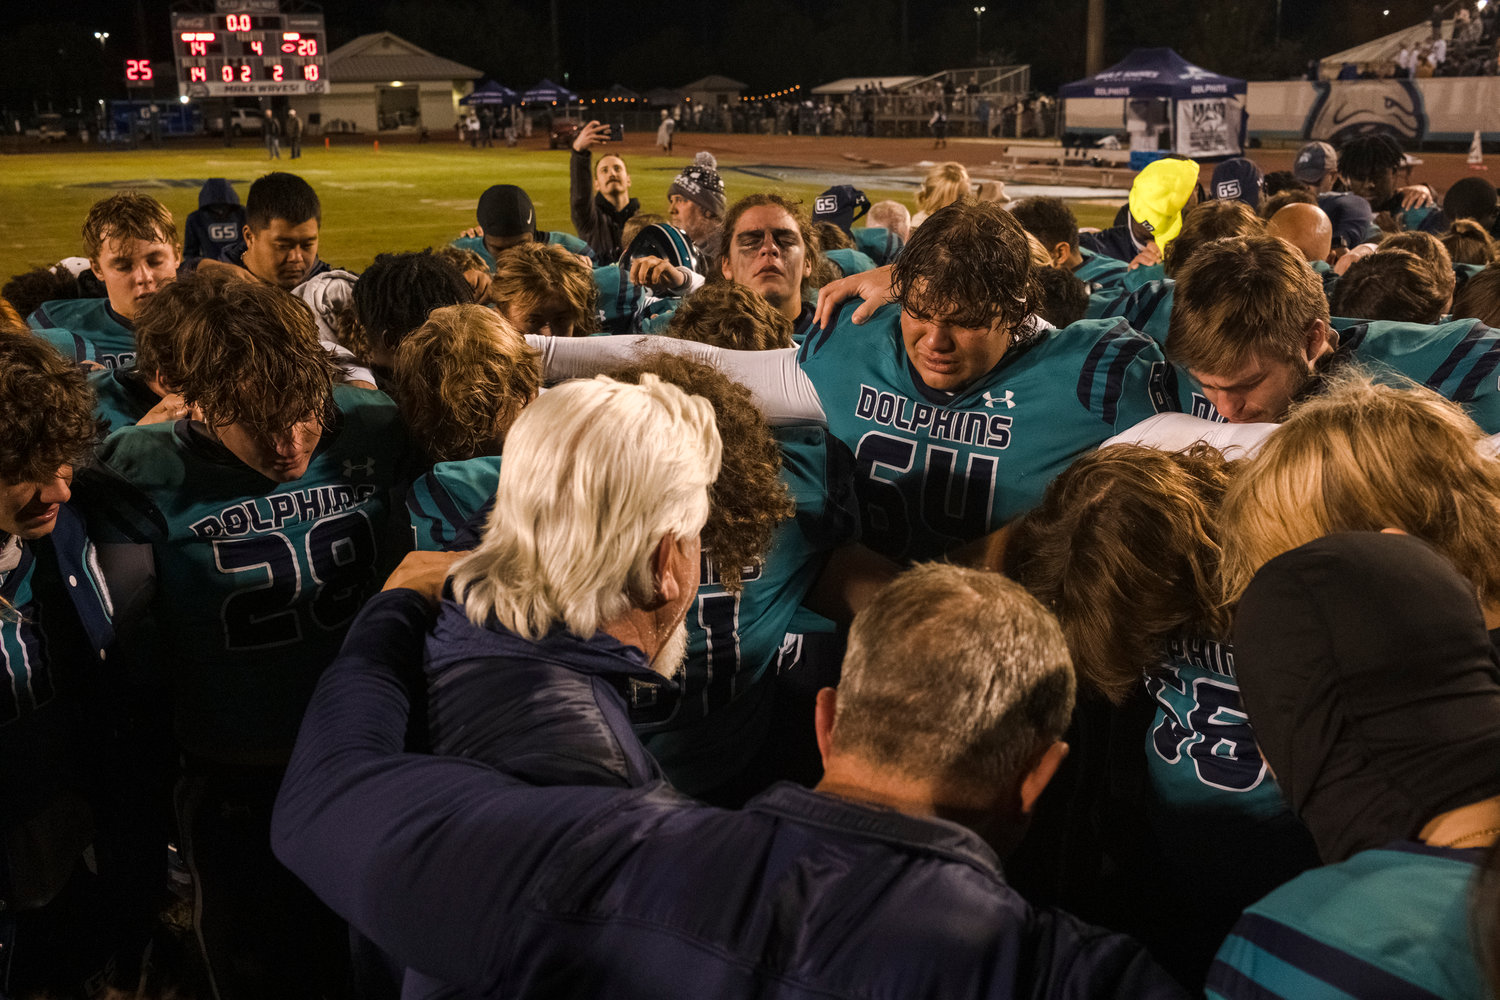 The Gulf Shores Dolphins meet one last time on the field of Mickey Miller Blackwell Stadium as character coach Fred Franks prays over the team following Friday night’s 20-14 loss to Faith Academy in the third round of the state playoffs.